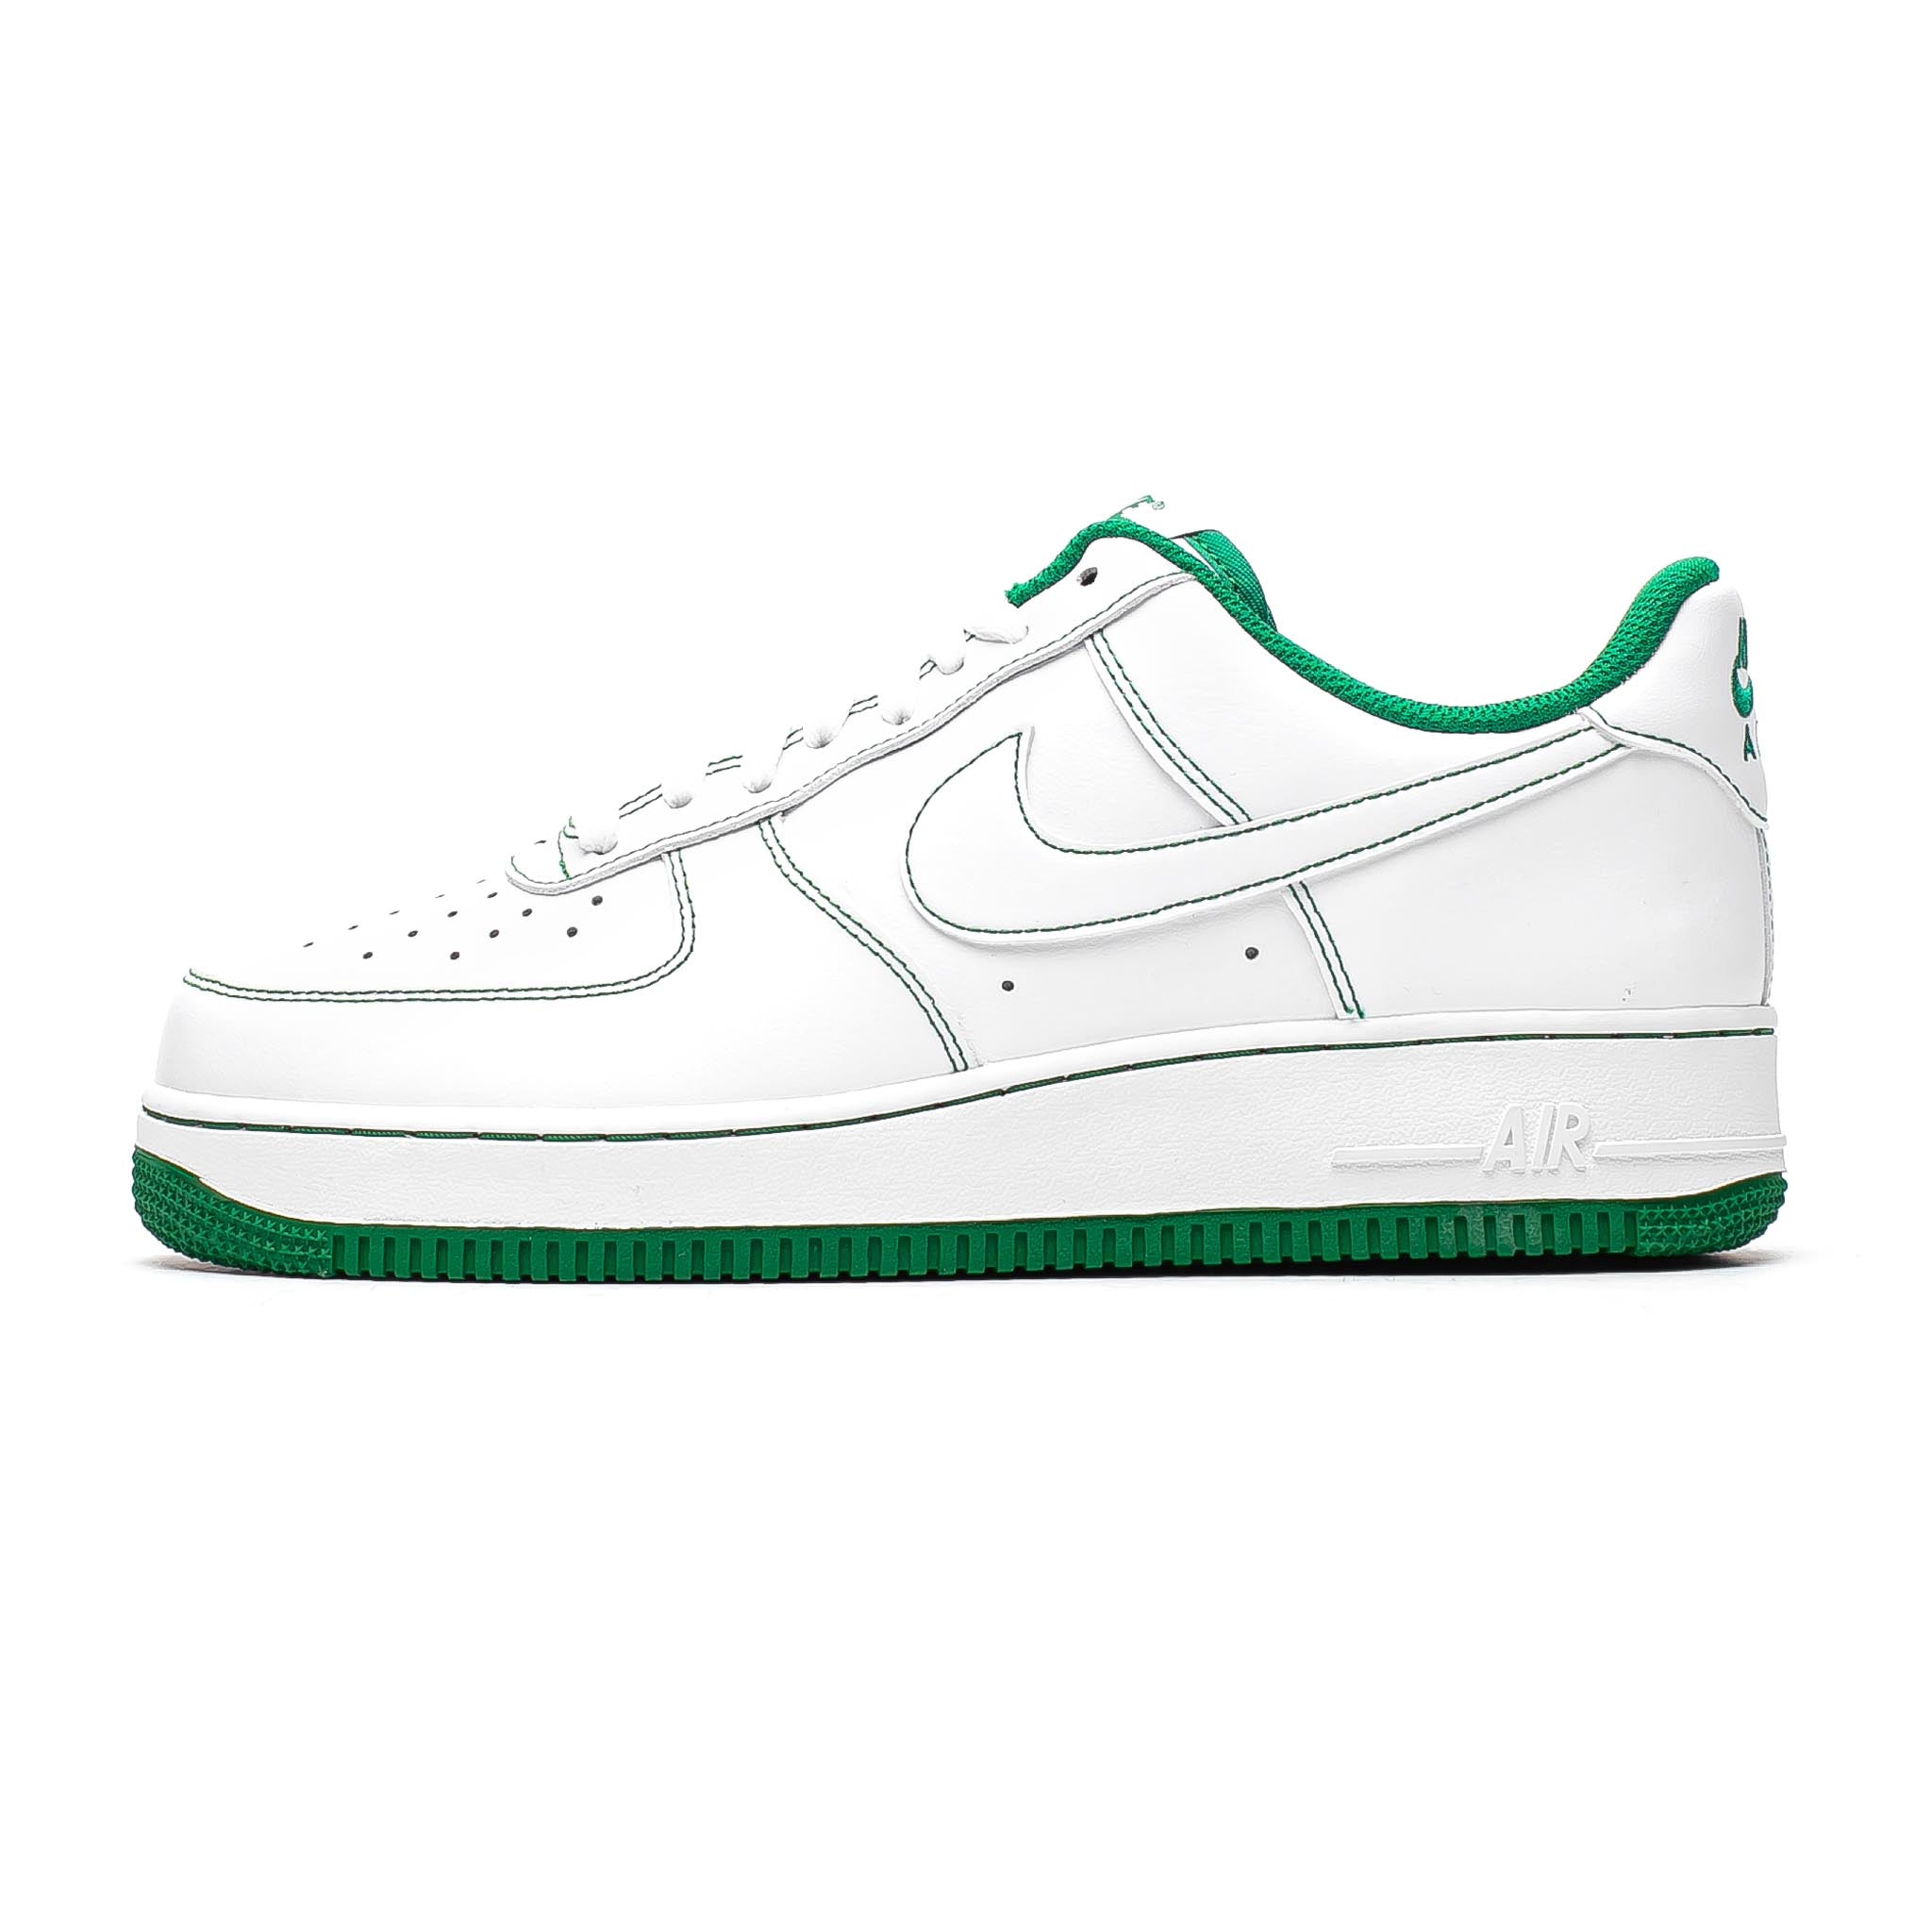 Nike Air Force 1 '07 'Contrast Stitch' White/Pine Green | SNEAKERBOX